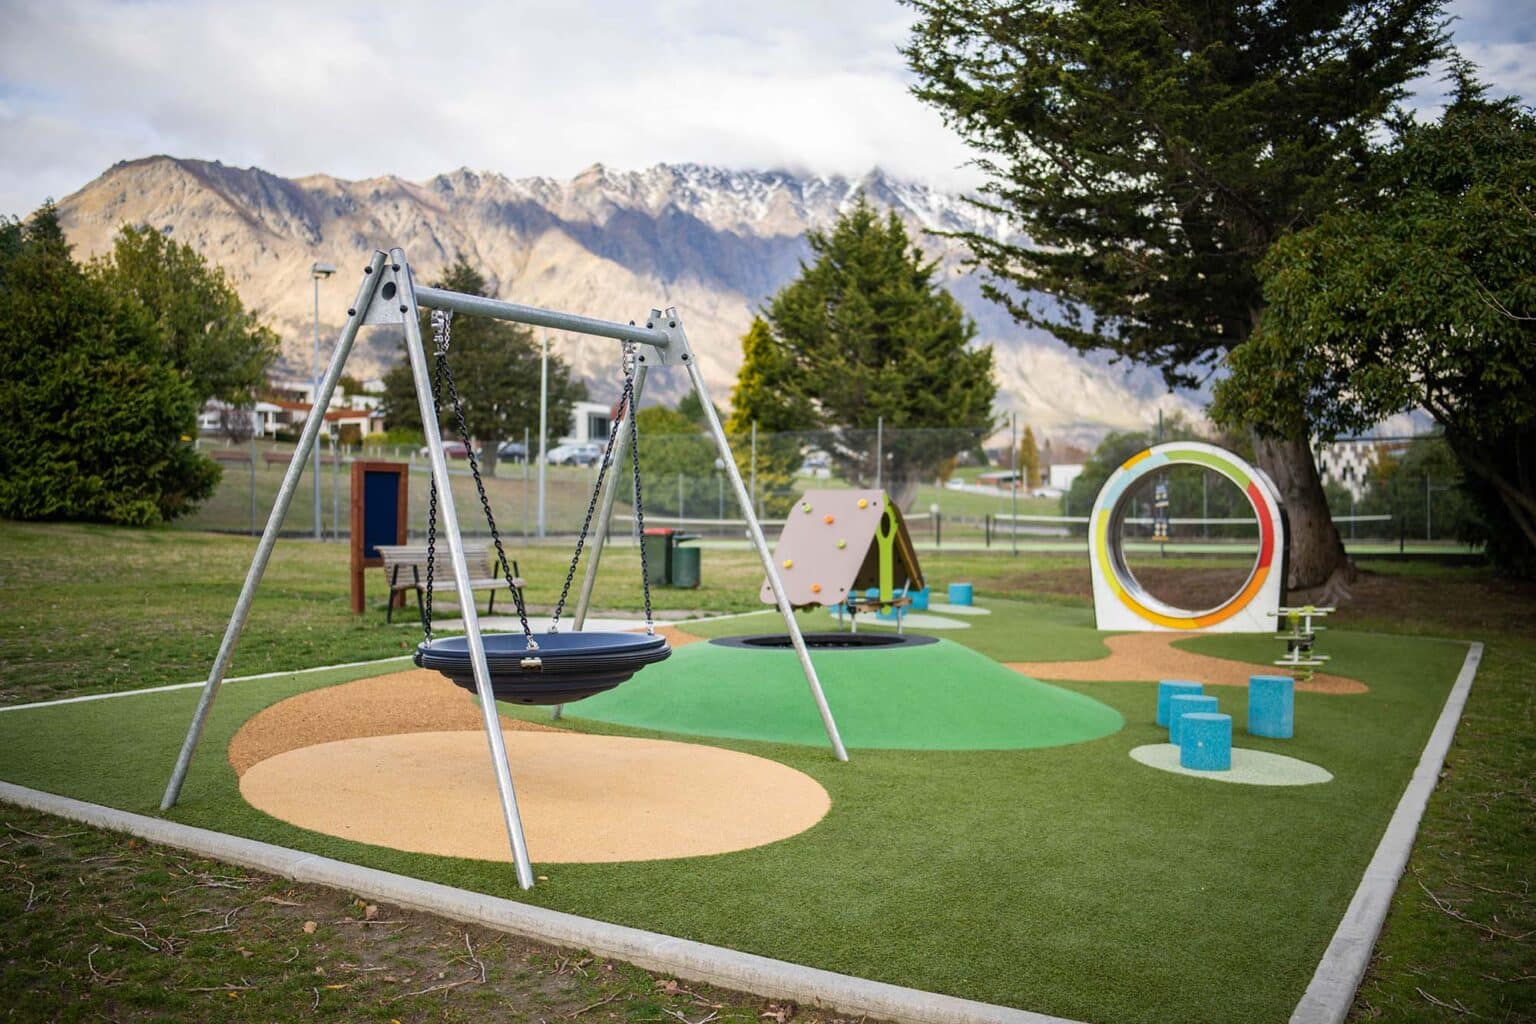 Combine old and new equipment when designing your playground.